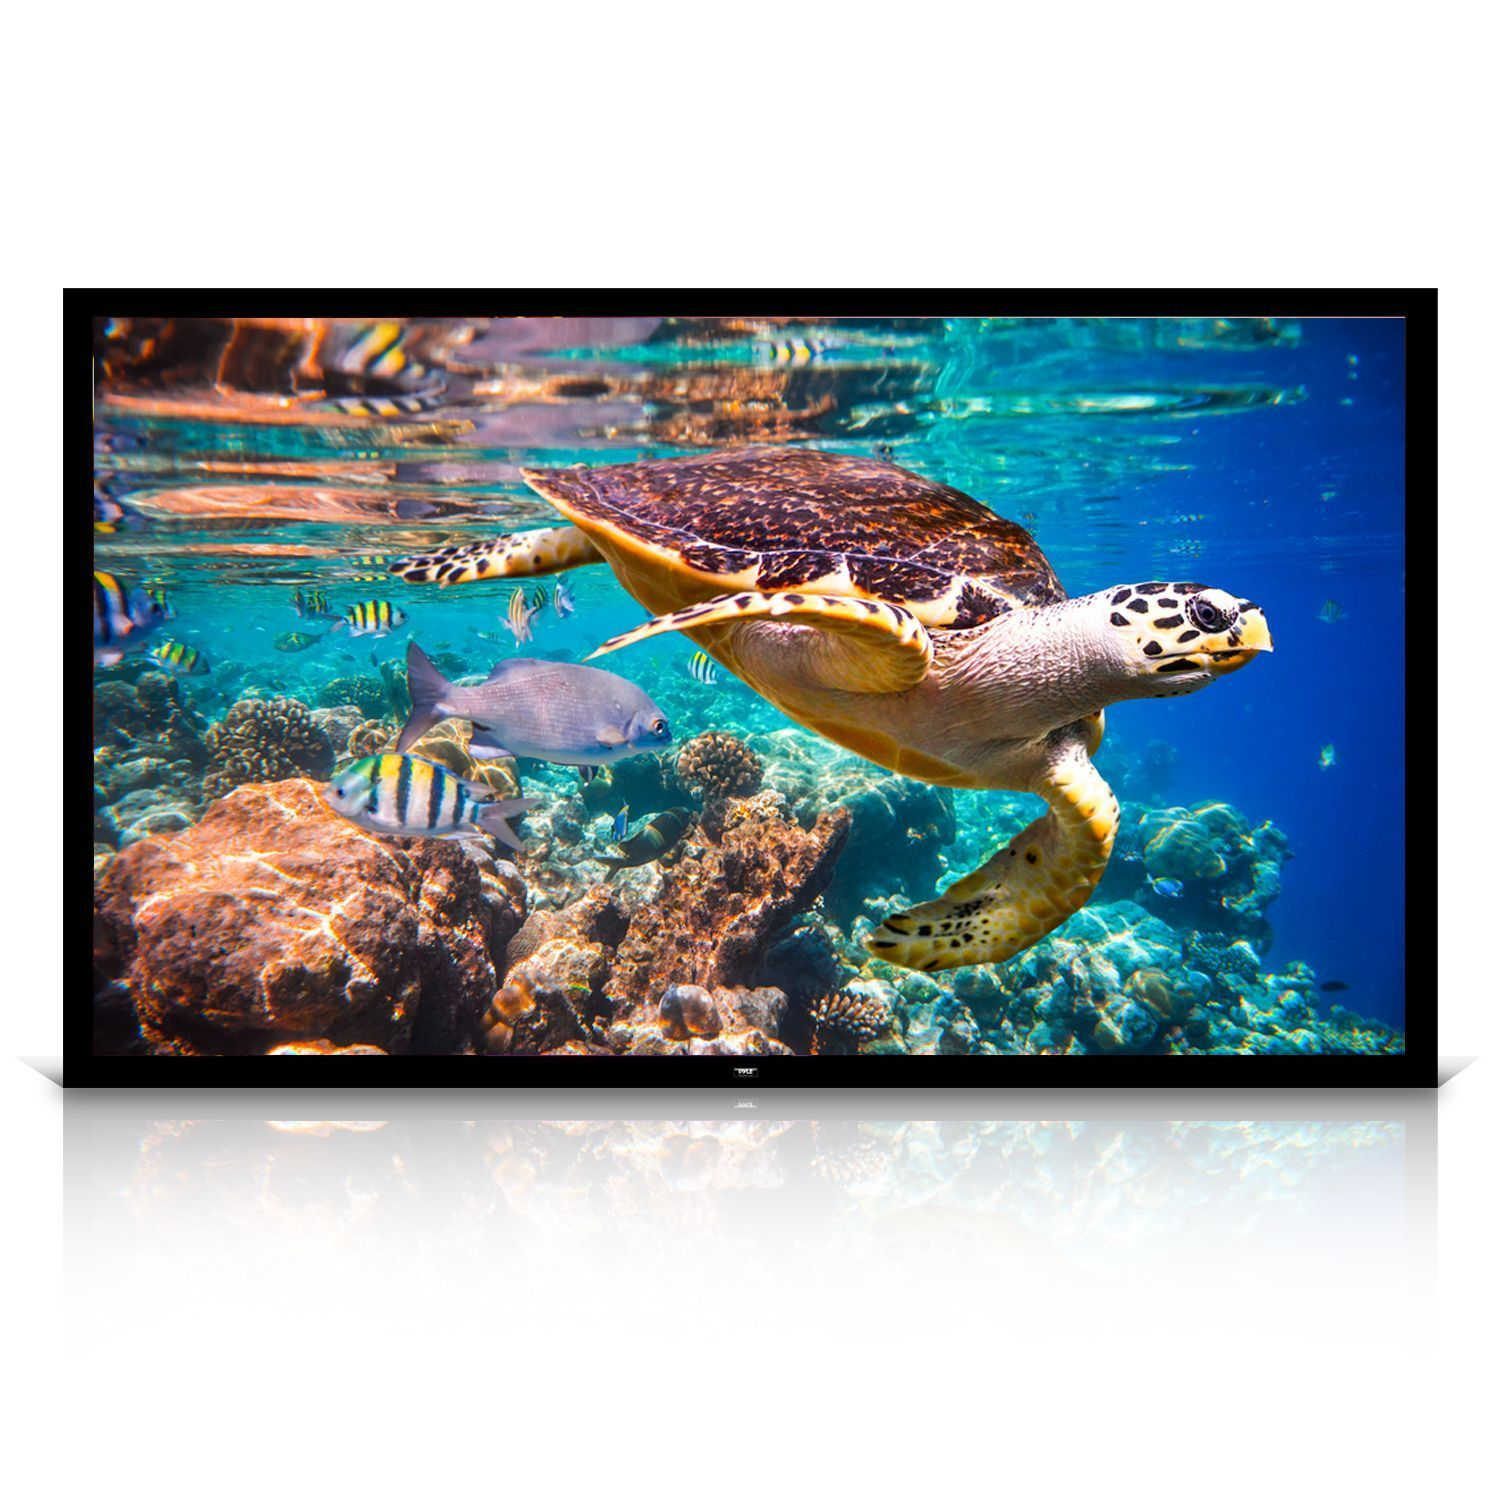 Pyle 120" Matt White Home Theater TV Wall Mounted Fixed Flat Projector Screen - 120 inch 16:9 Full HD Projection - Easy to Set Up for Room Video, Slideshow, Movie / Film Showing - PRJTPFL122